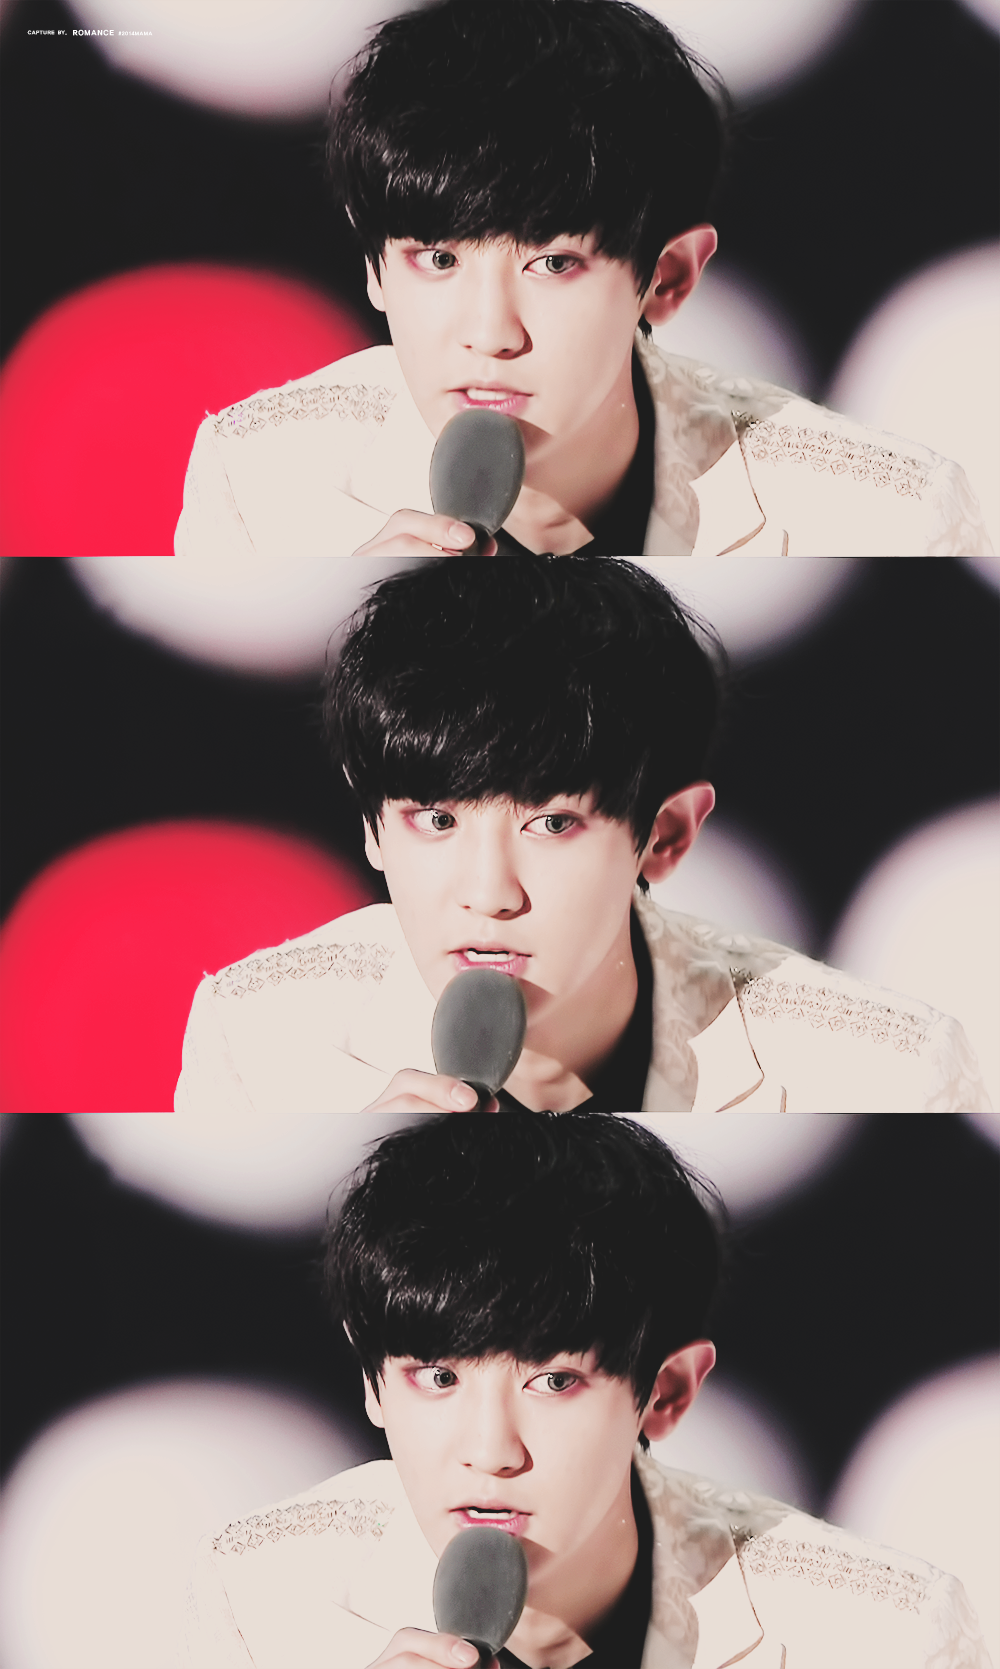 chanyeol-exo-overdose.png.pagespeed.ce.vEVfdEcOwr (1)